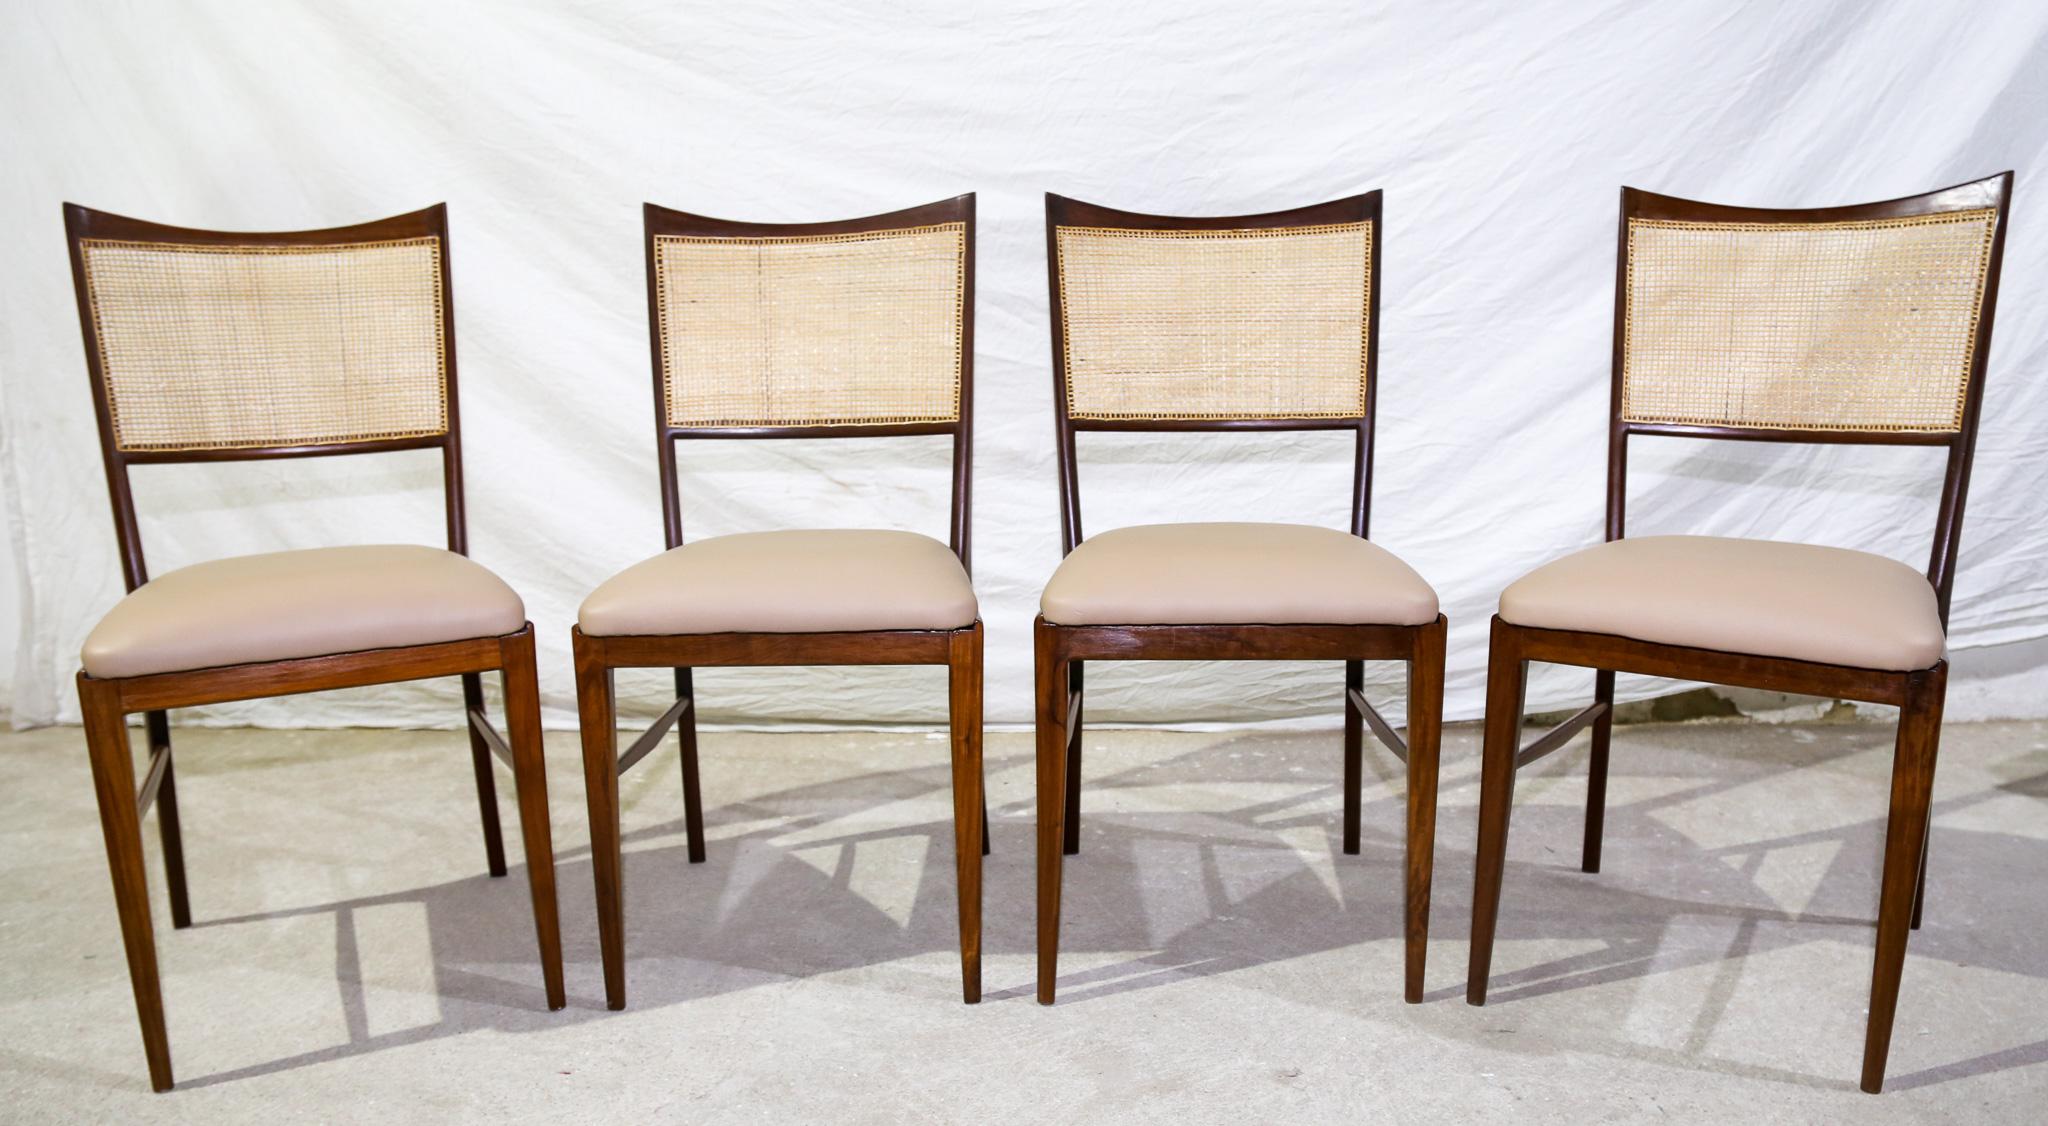 Brazilian Modern Set of Four Chairs in Hardwood & Beige Leather, Unknown, 1960s For Sale 1